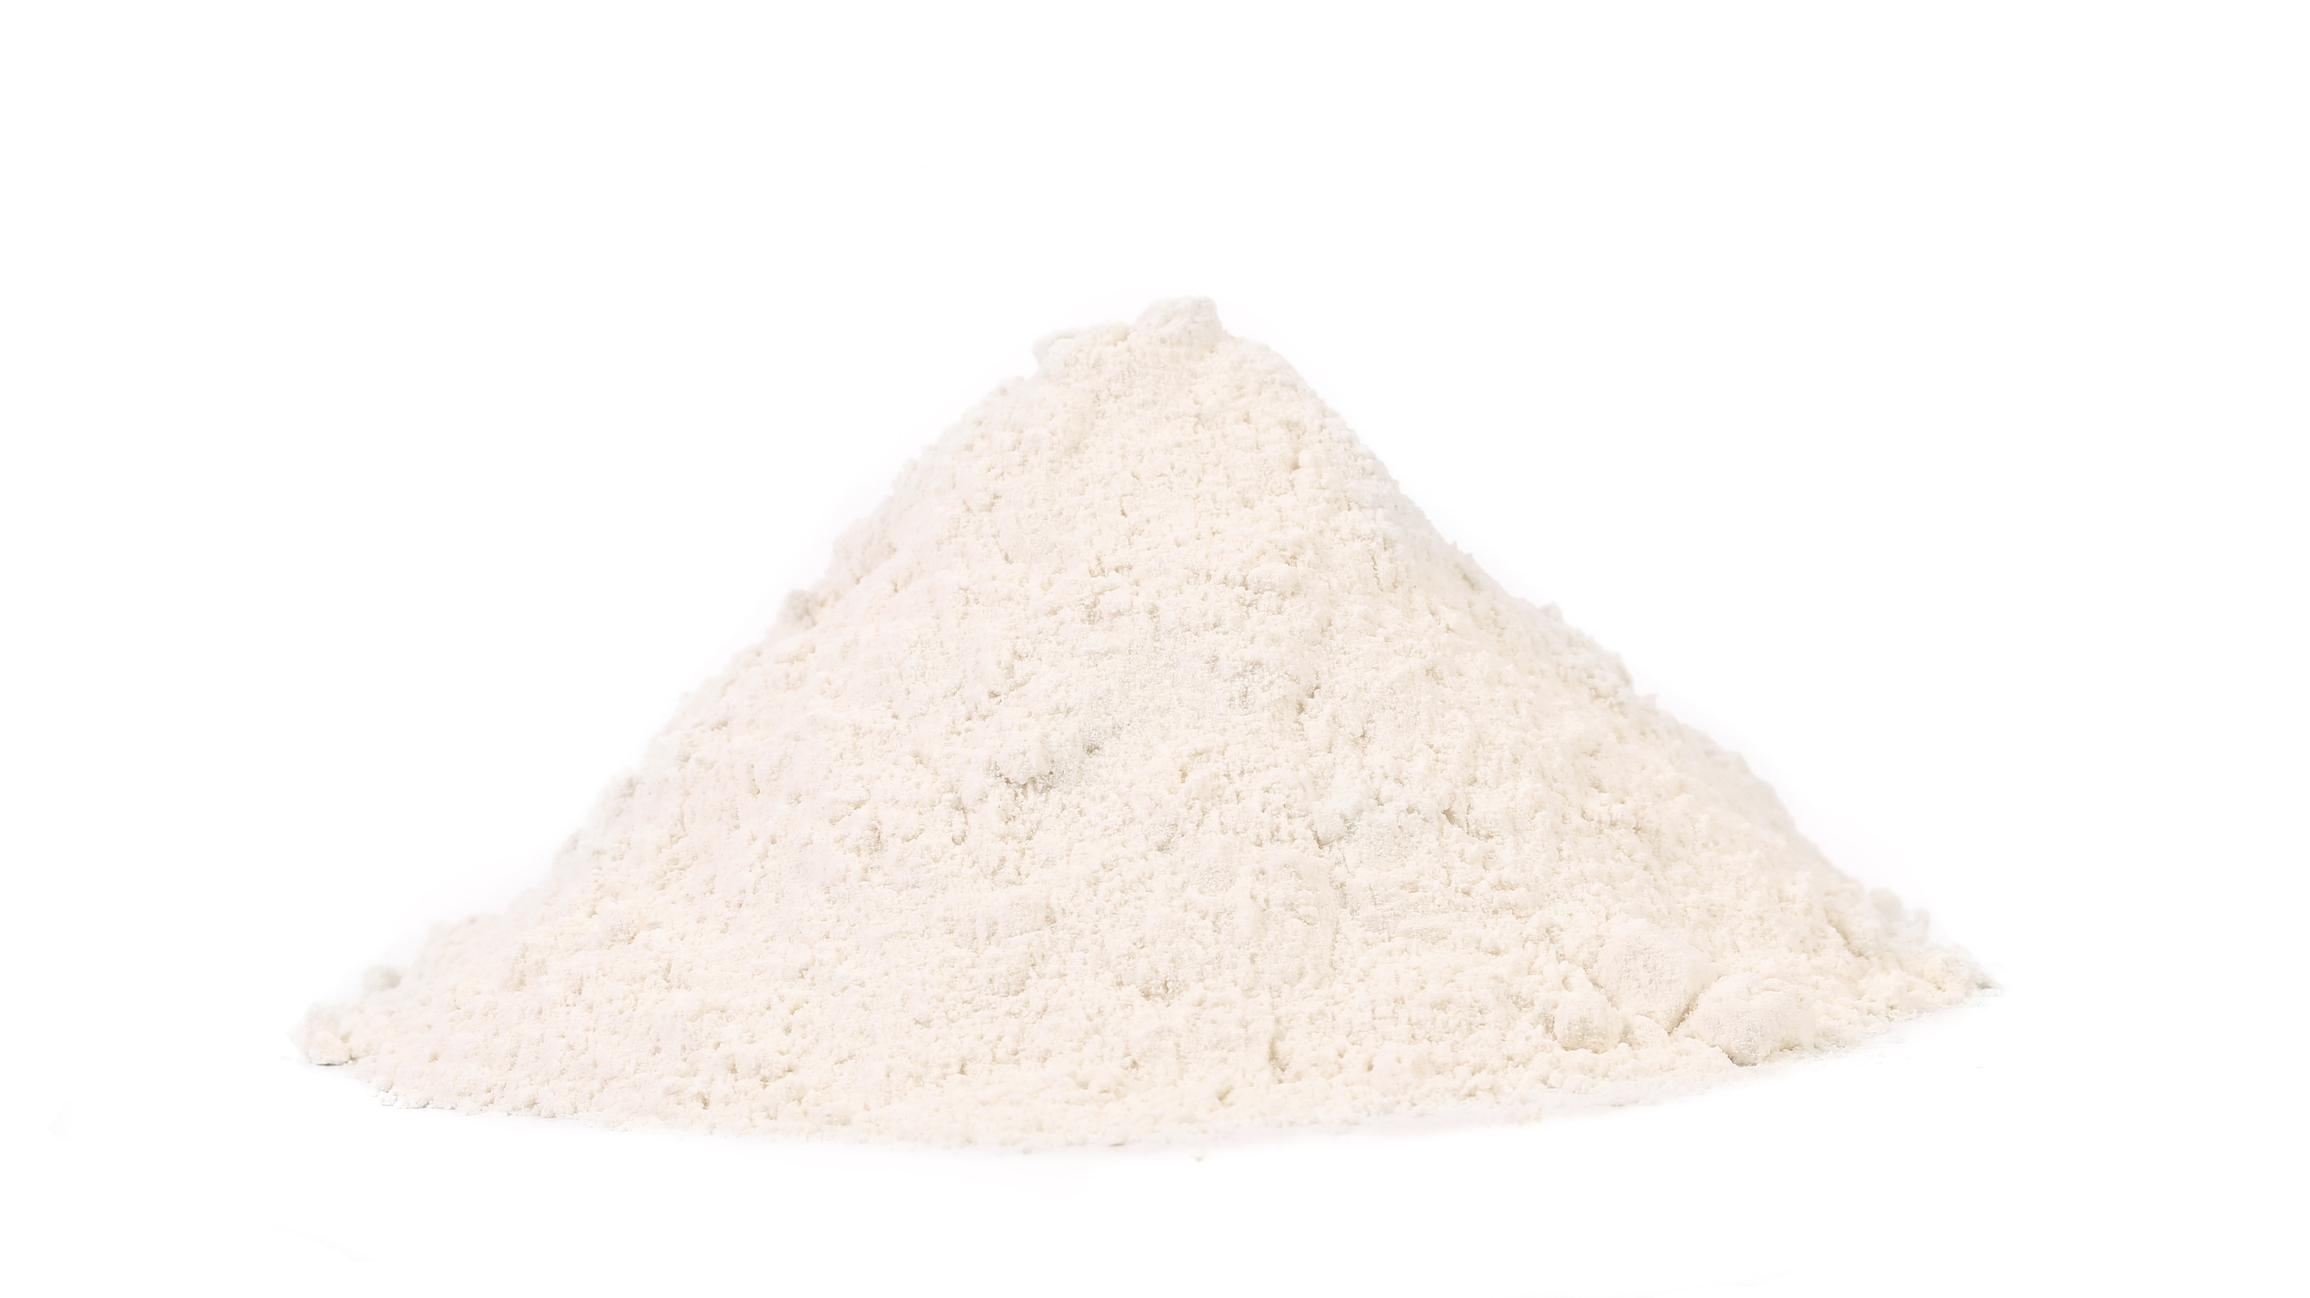 Front view of wheat flour. Isolated on a white background.